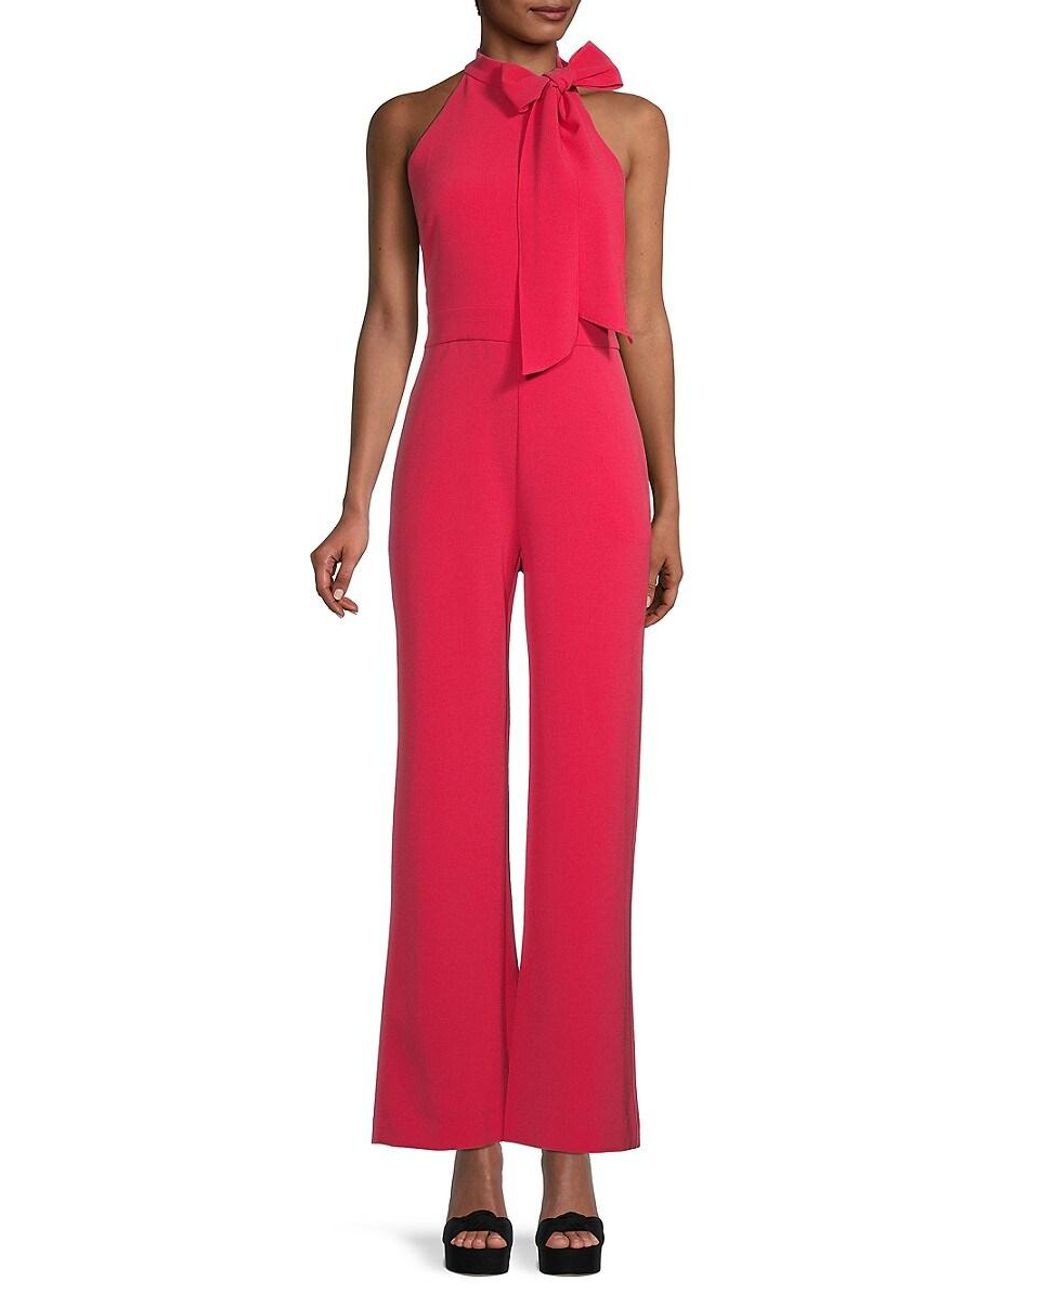 Vince Camuto Kors Bow Crepe Jumpsuit in Coral (Red) | Lyst